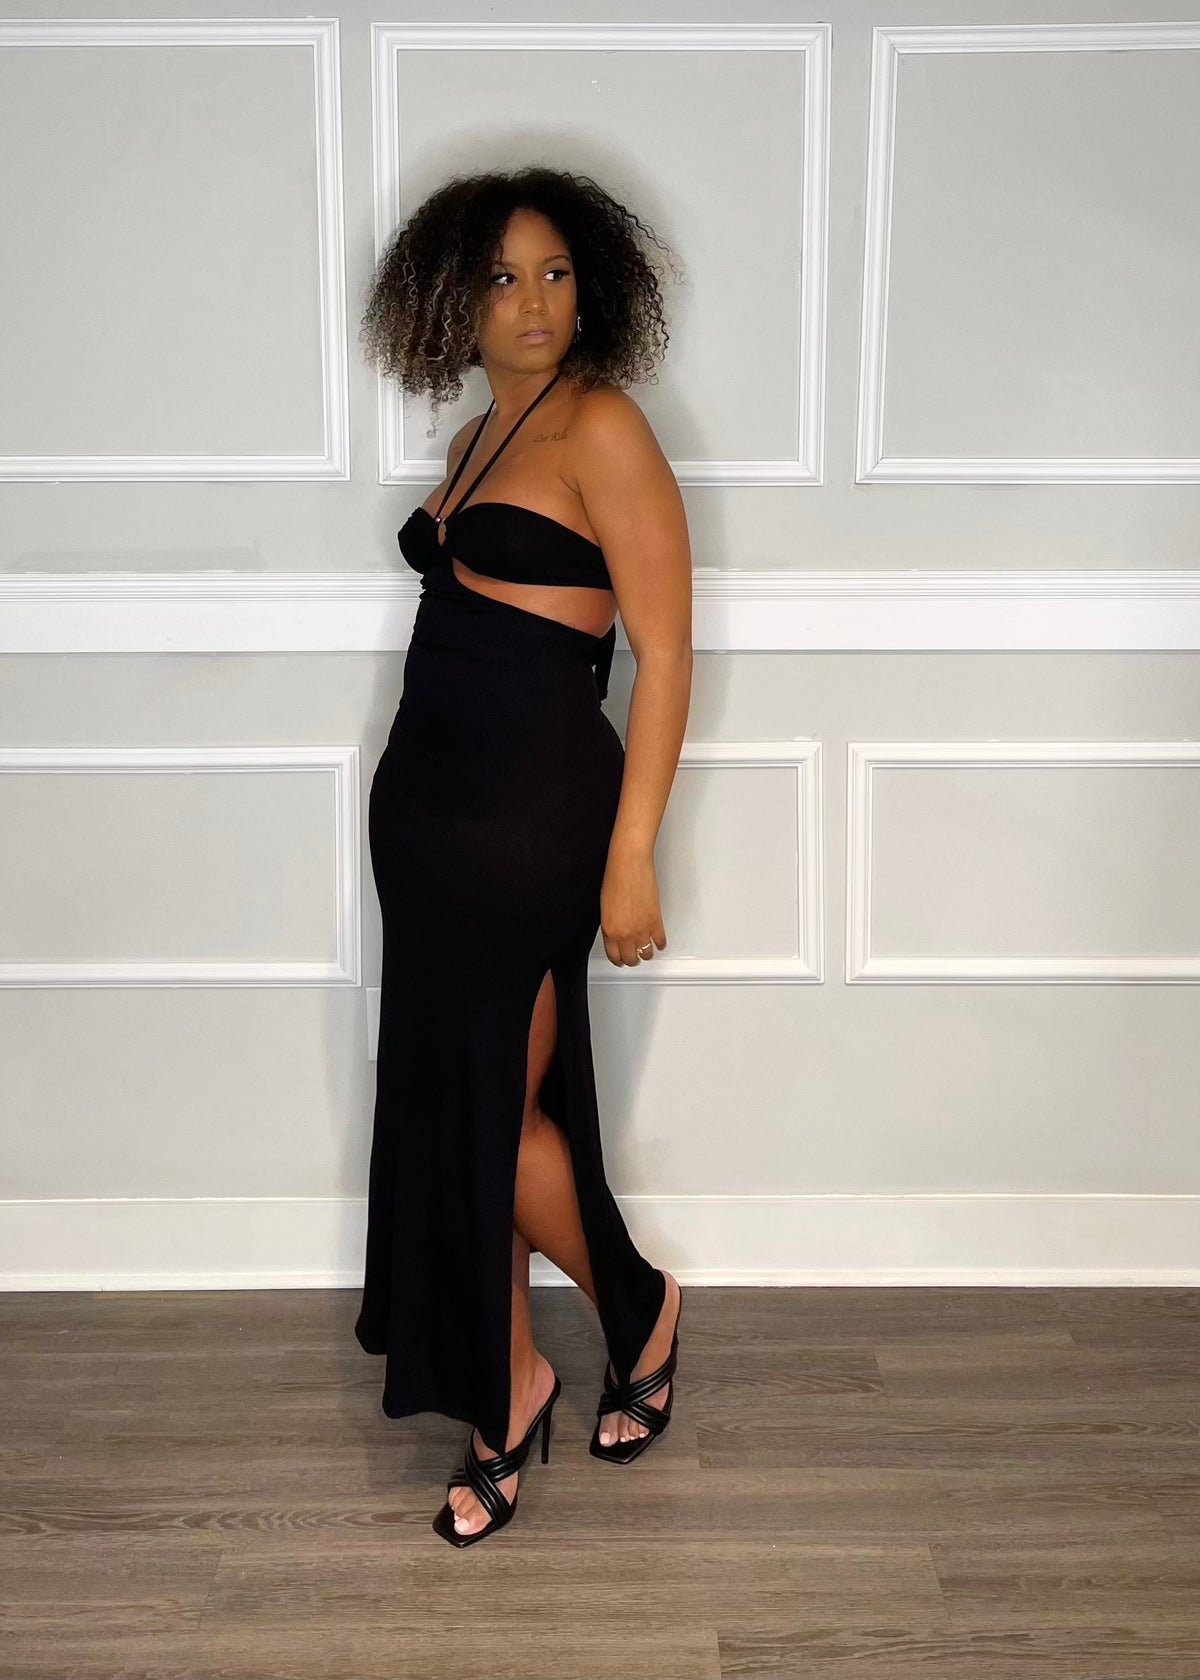 Get trendy with Britt Black Halter Cut-out Maxi Dress - Dresses available at ELLE TENAJ. Grab yours for $35 today!